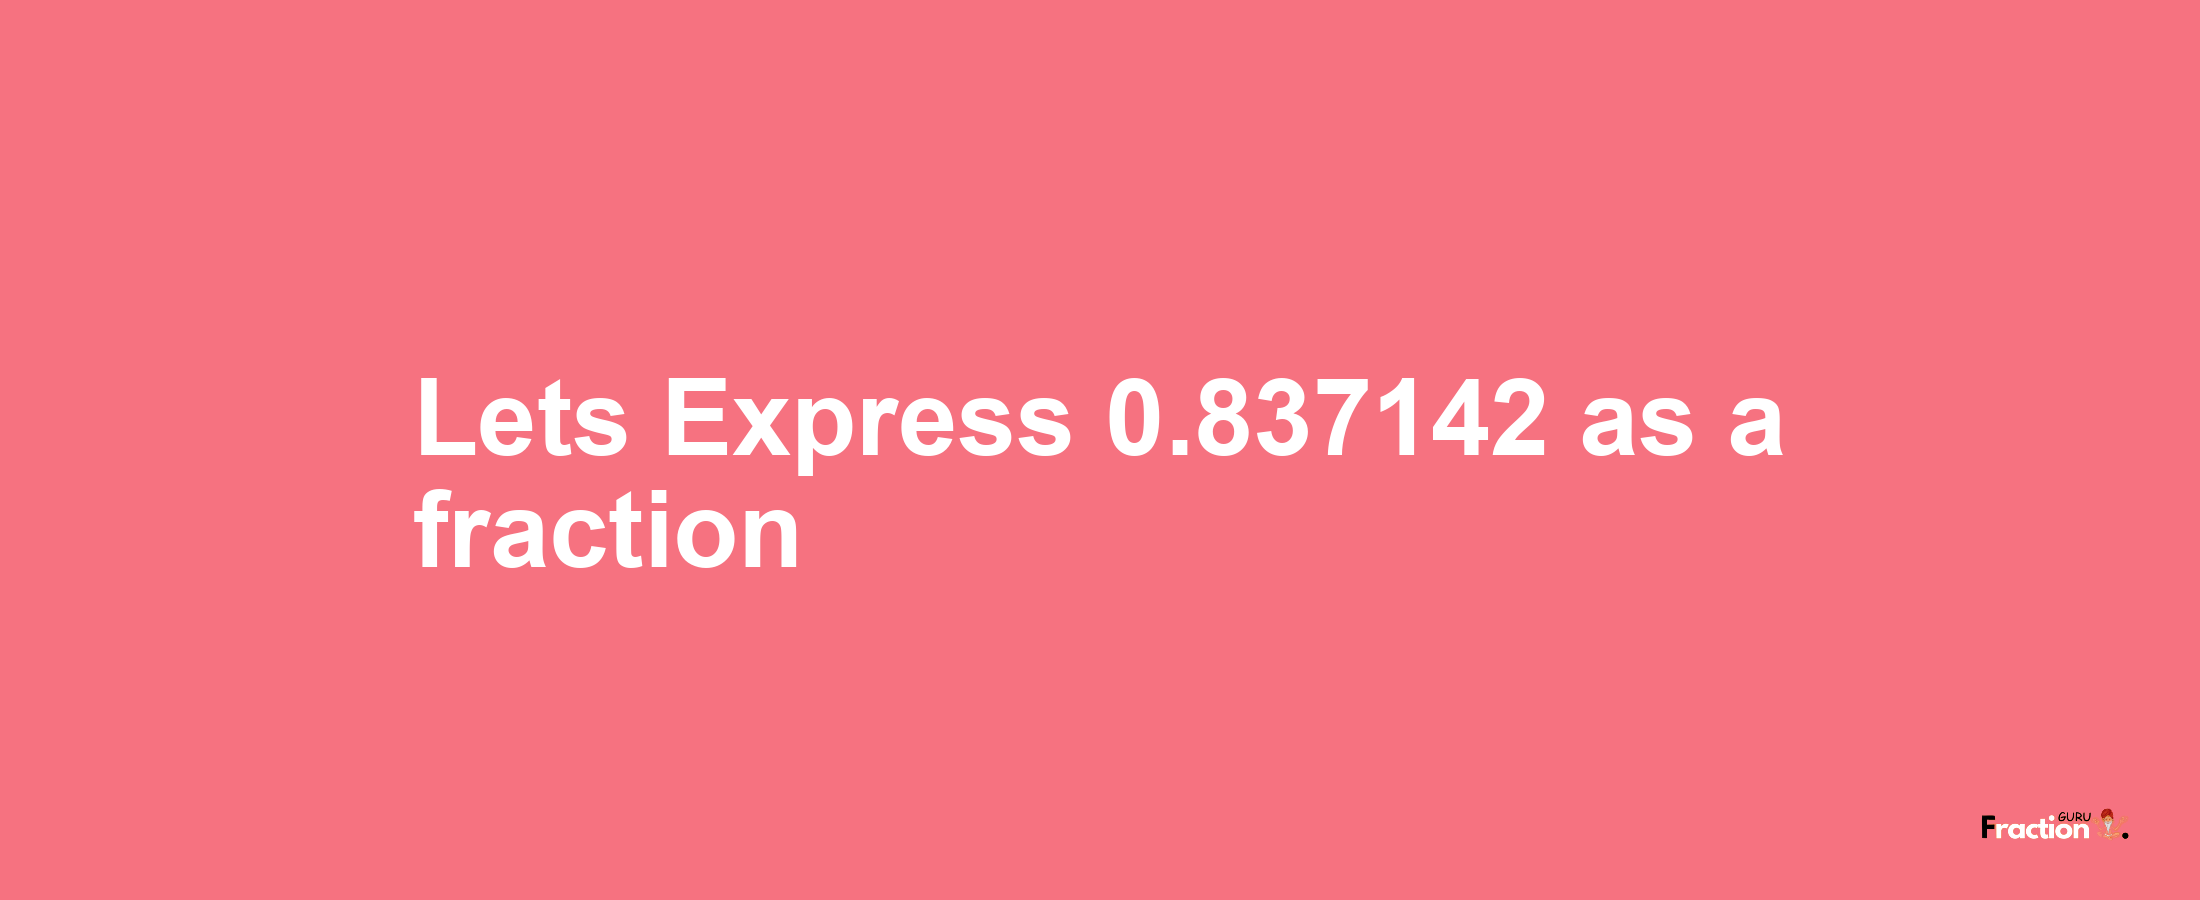 Lets Express 0.837142 as afraction